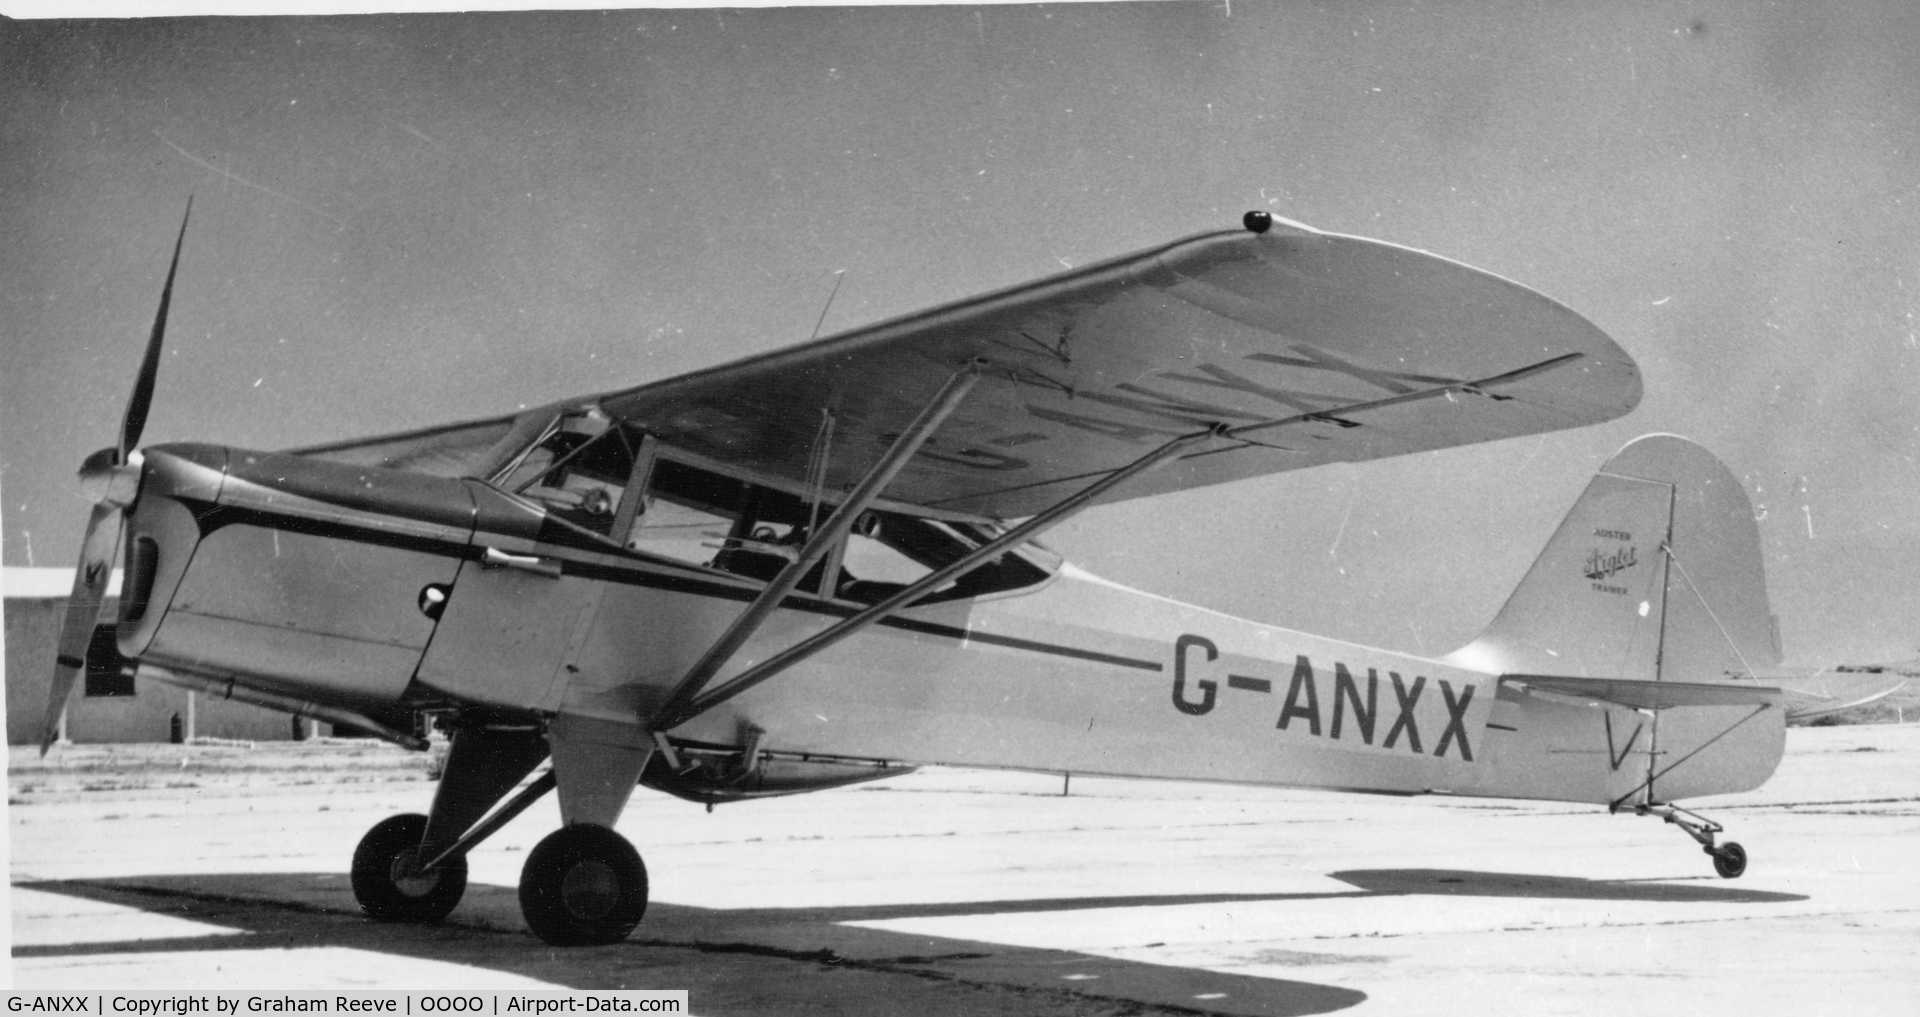 G-ANXX, 1955 Auster J-5L Aiglet Trainer C/N 3133, Recently discovered photograph with no information.